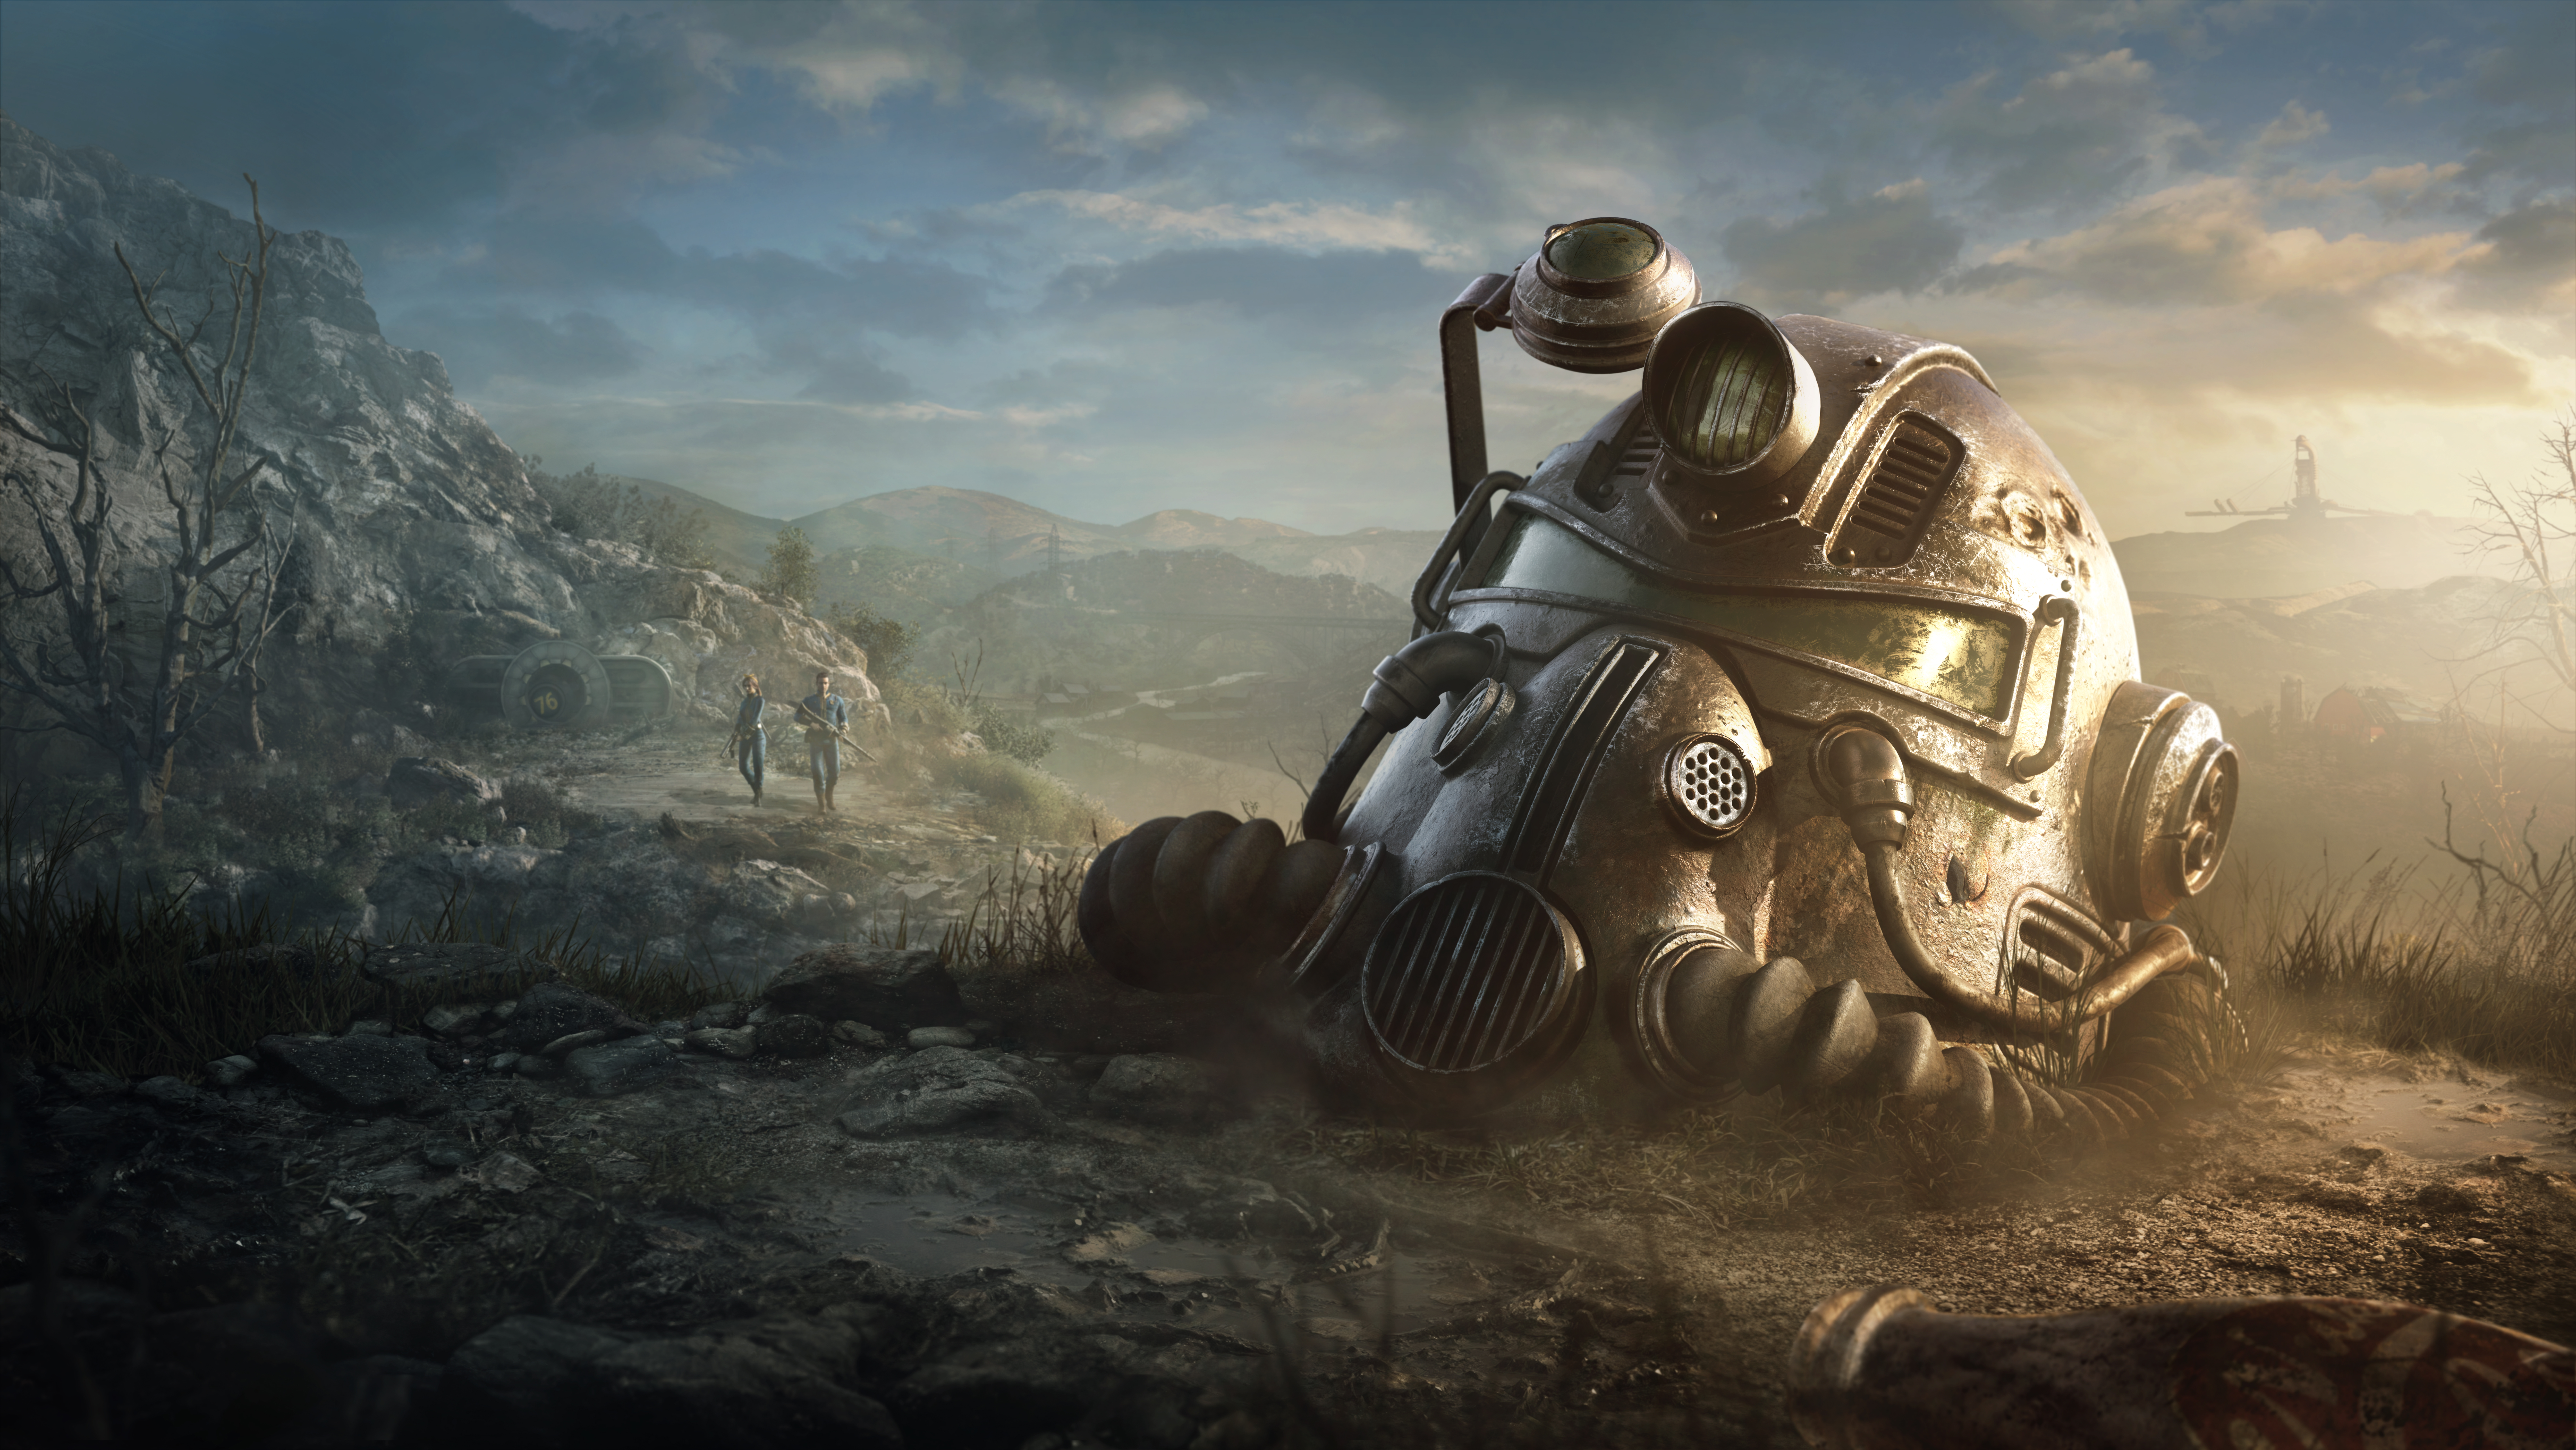 Video Game Fallout 76 HD Wallpaper | Background Image